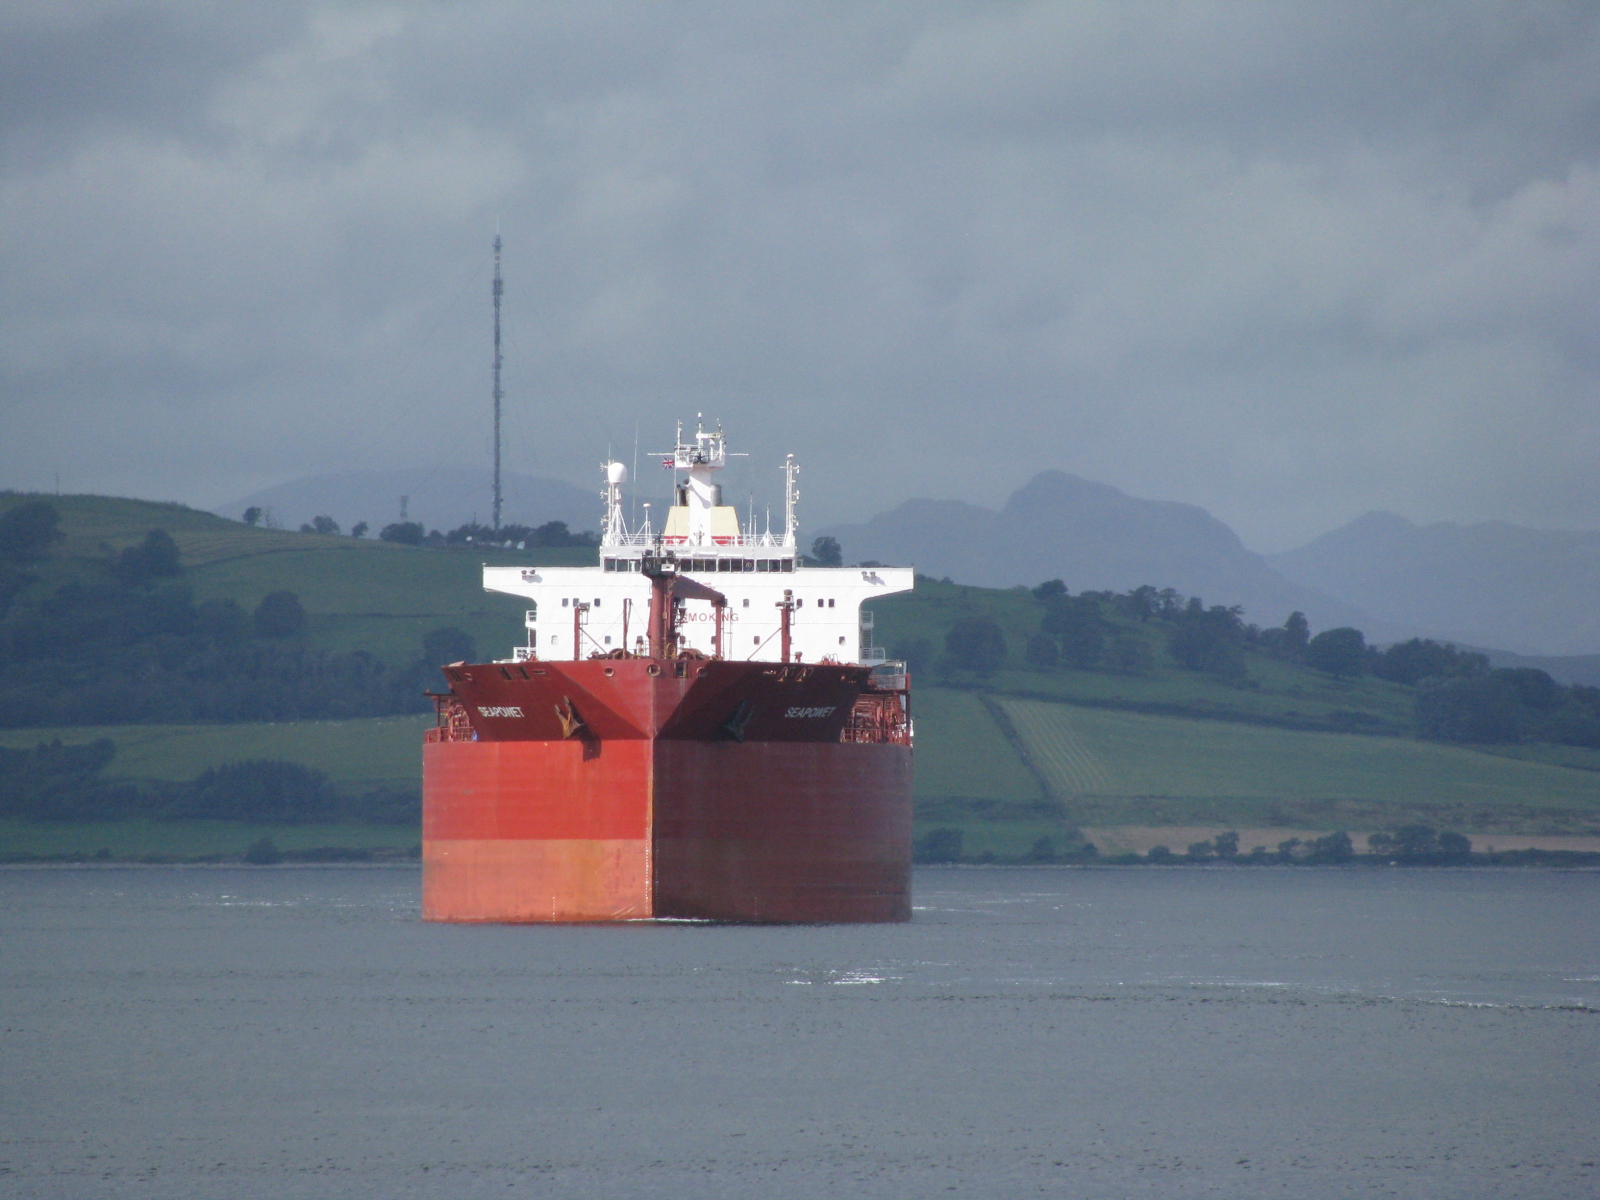 This huge cargo ship went up the Clyde to Glasgow a few weeks ago.